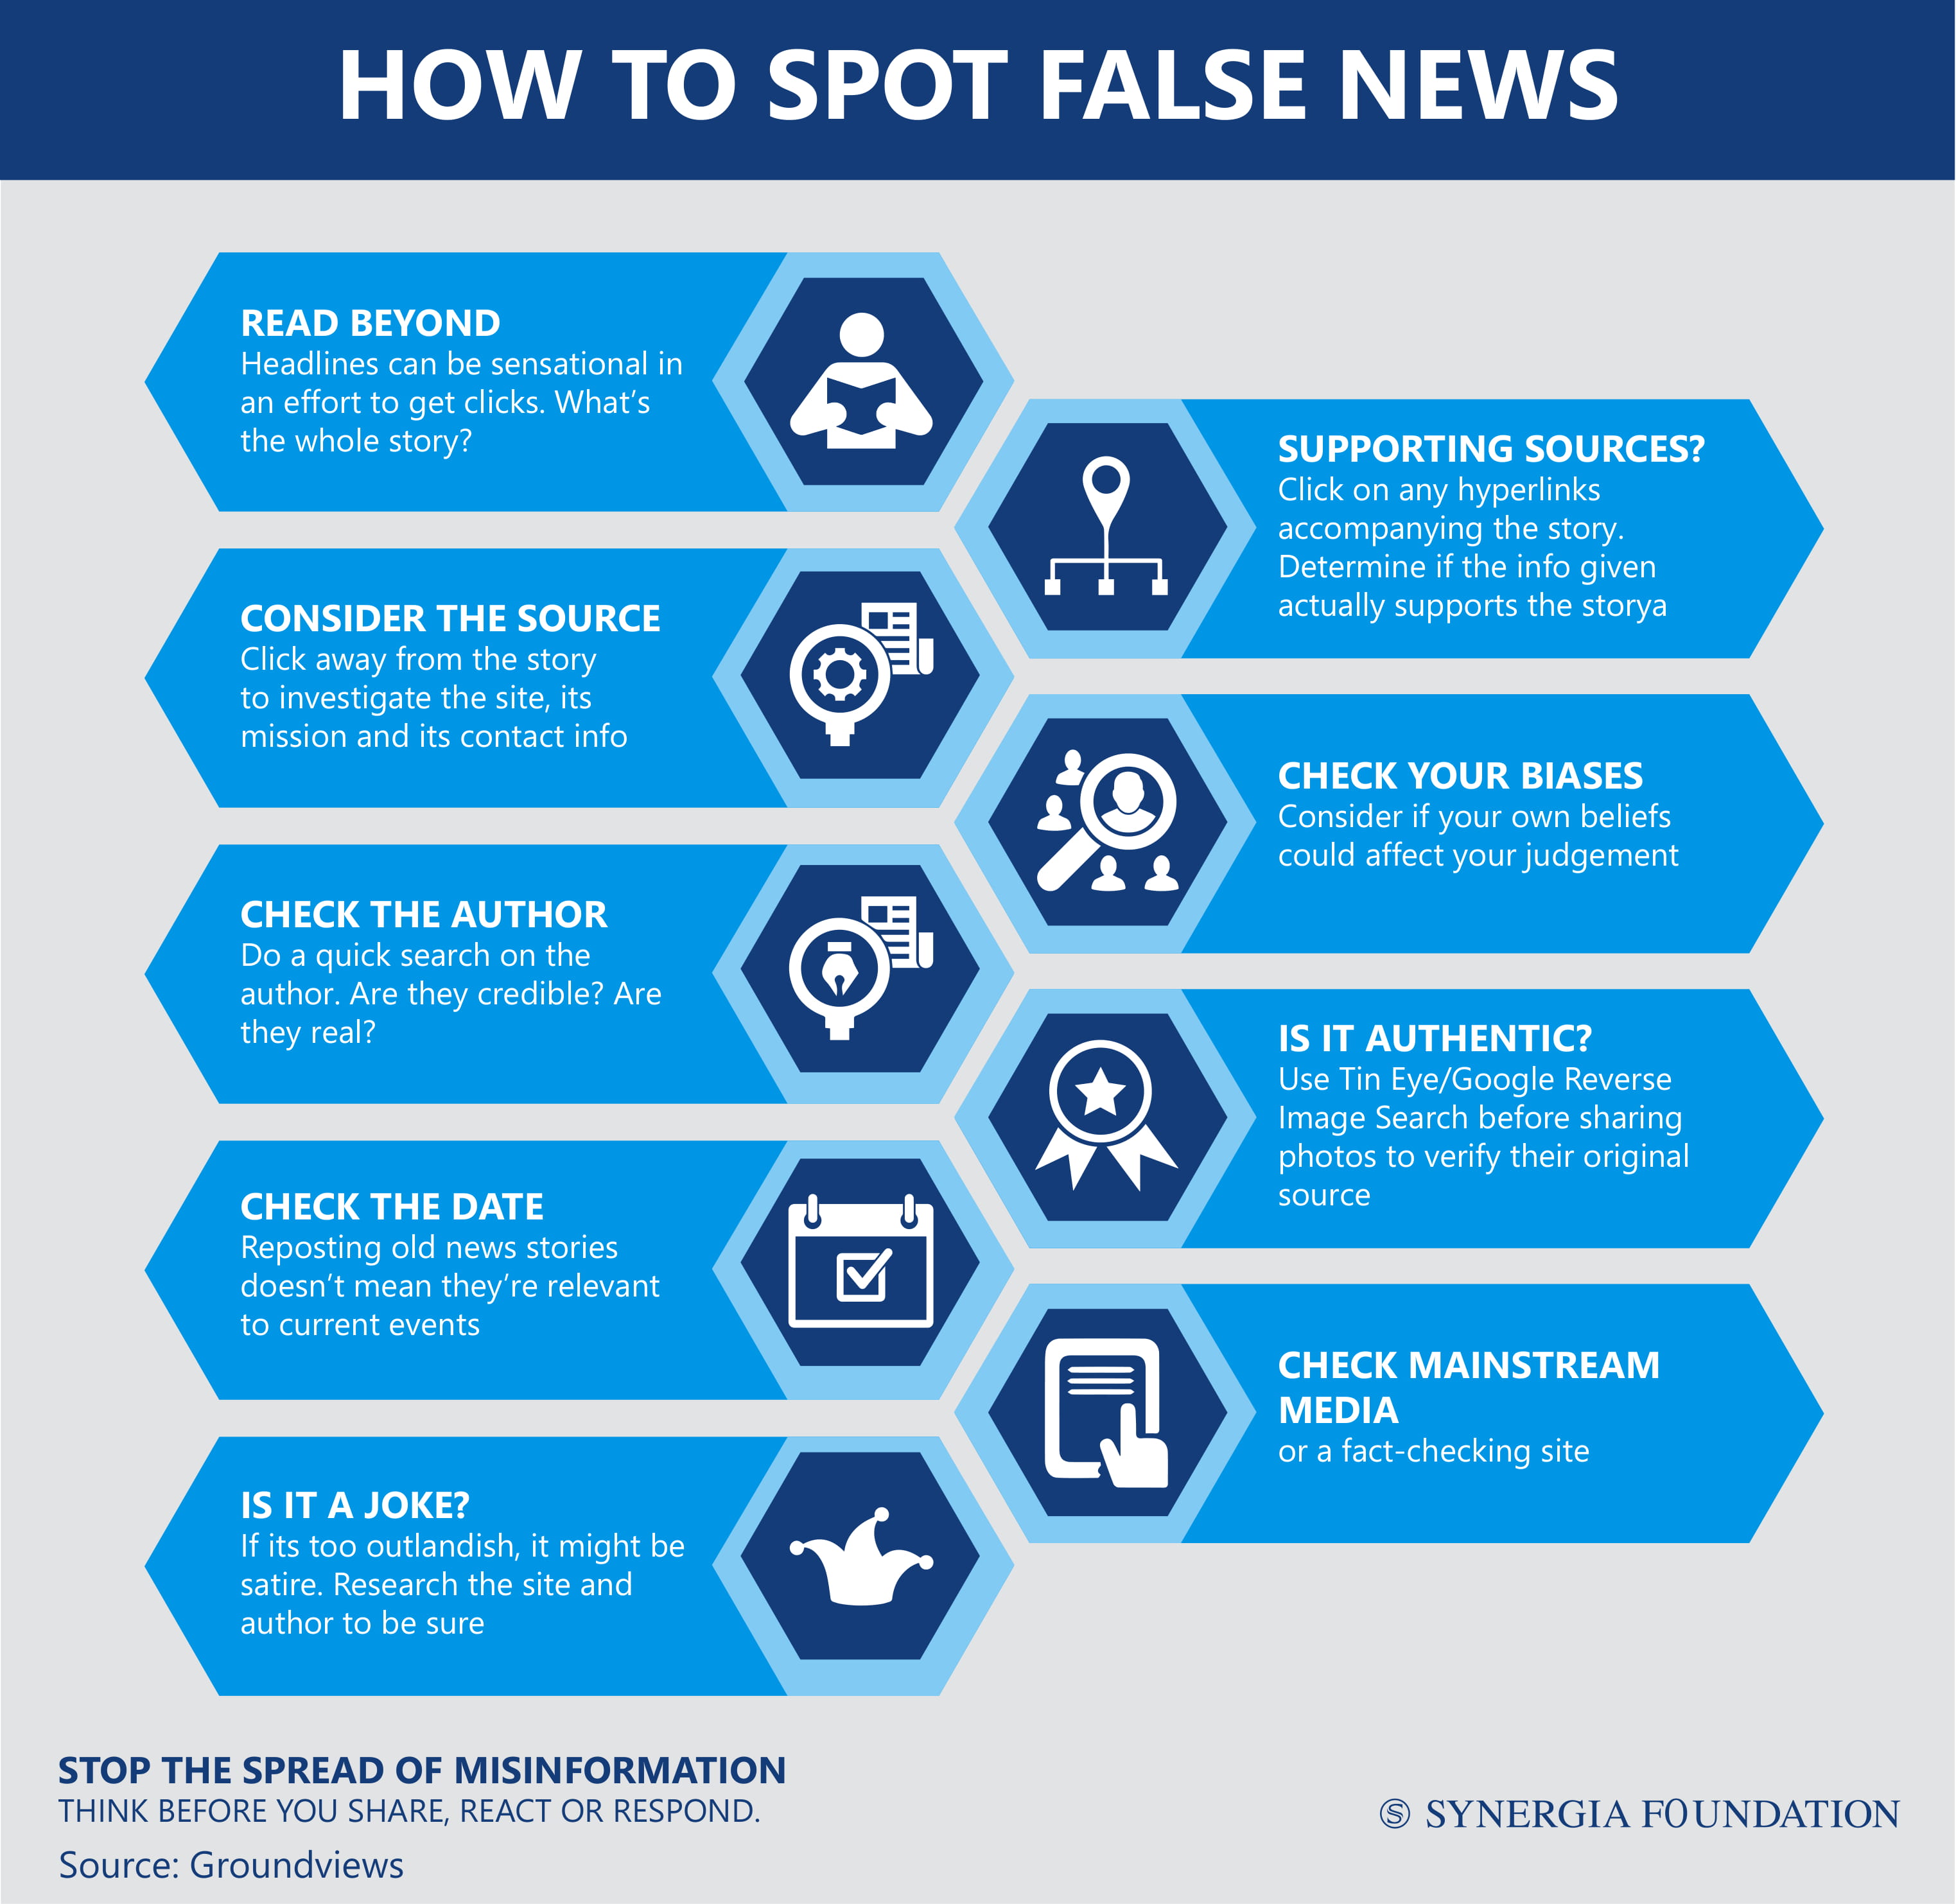 How to spot fake news?